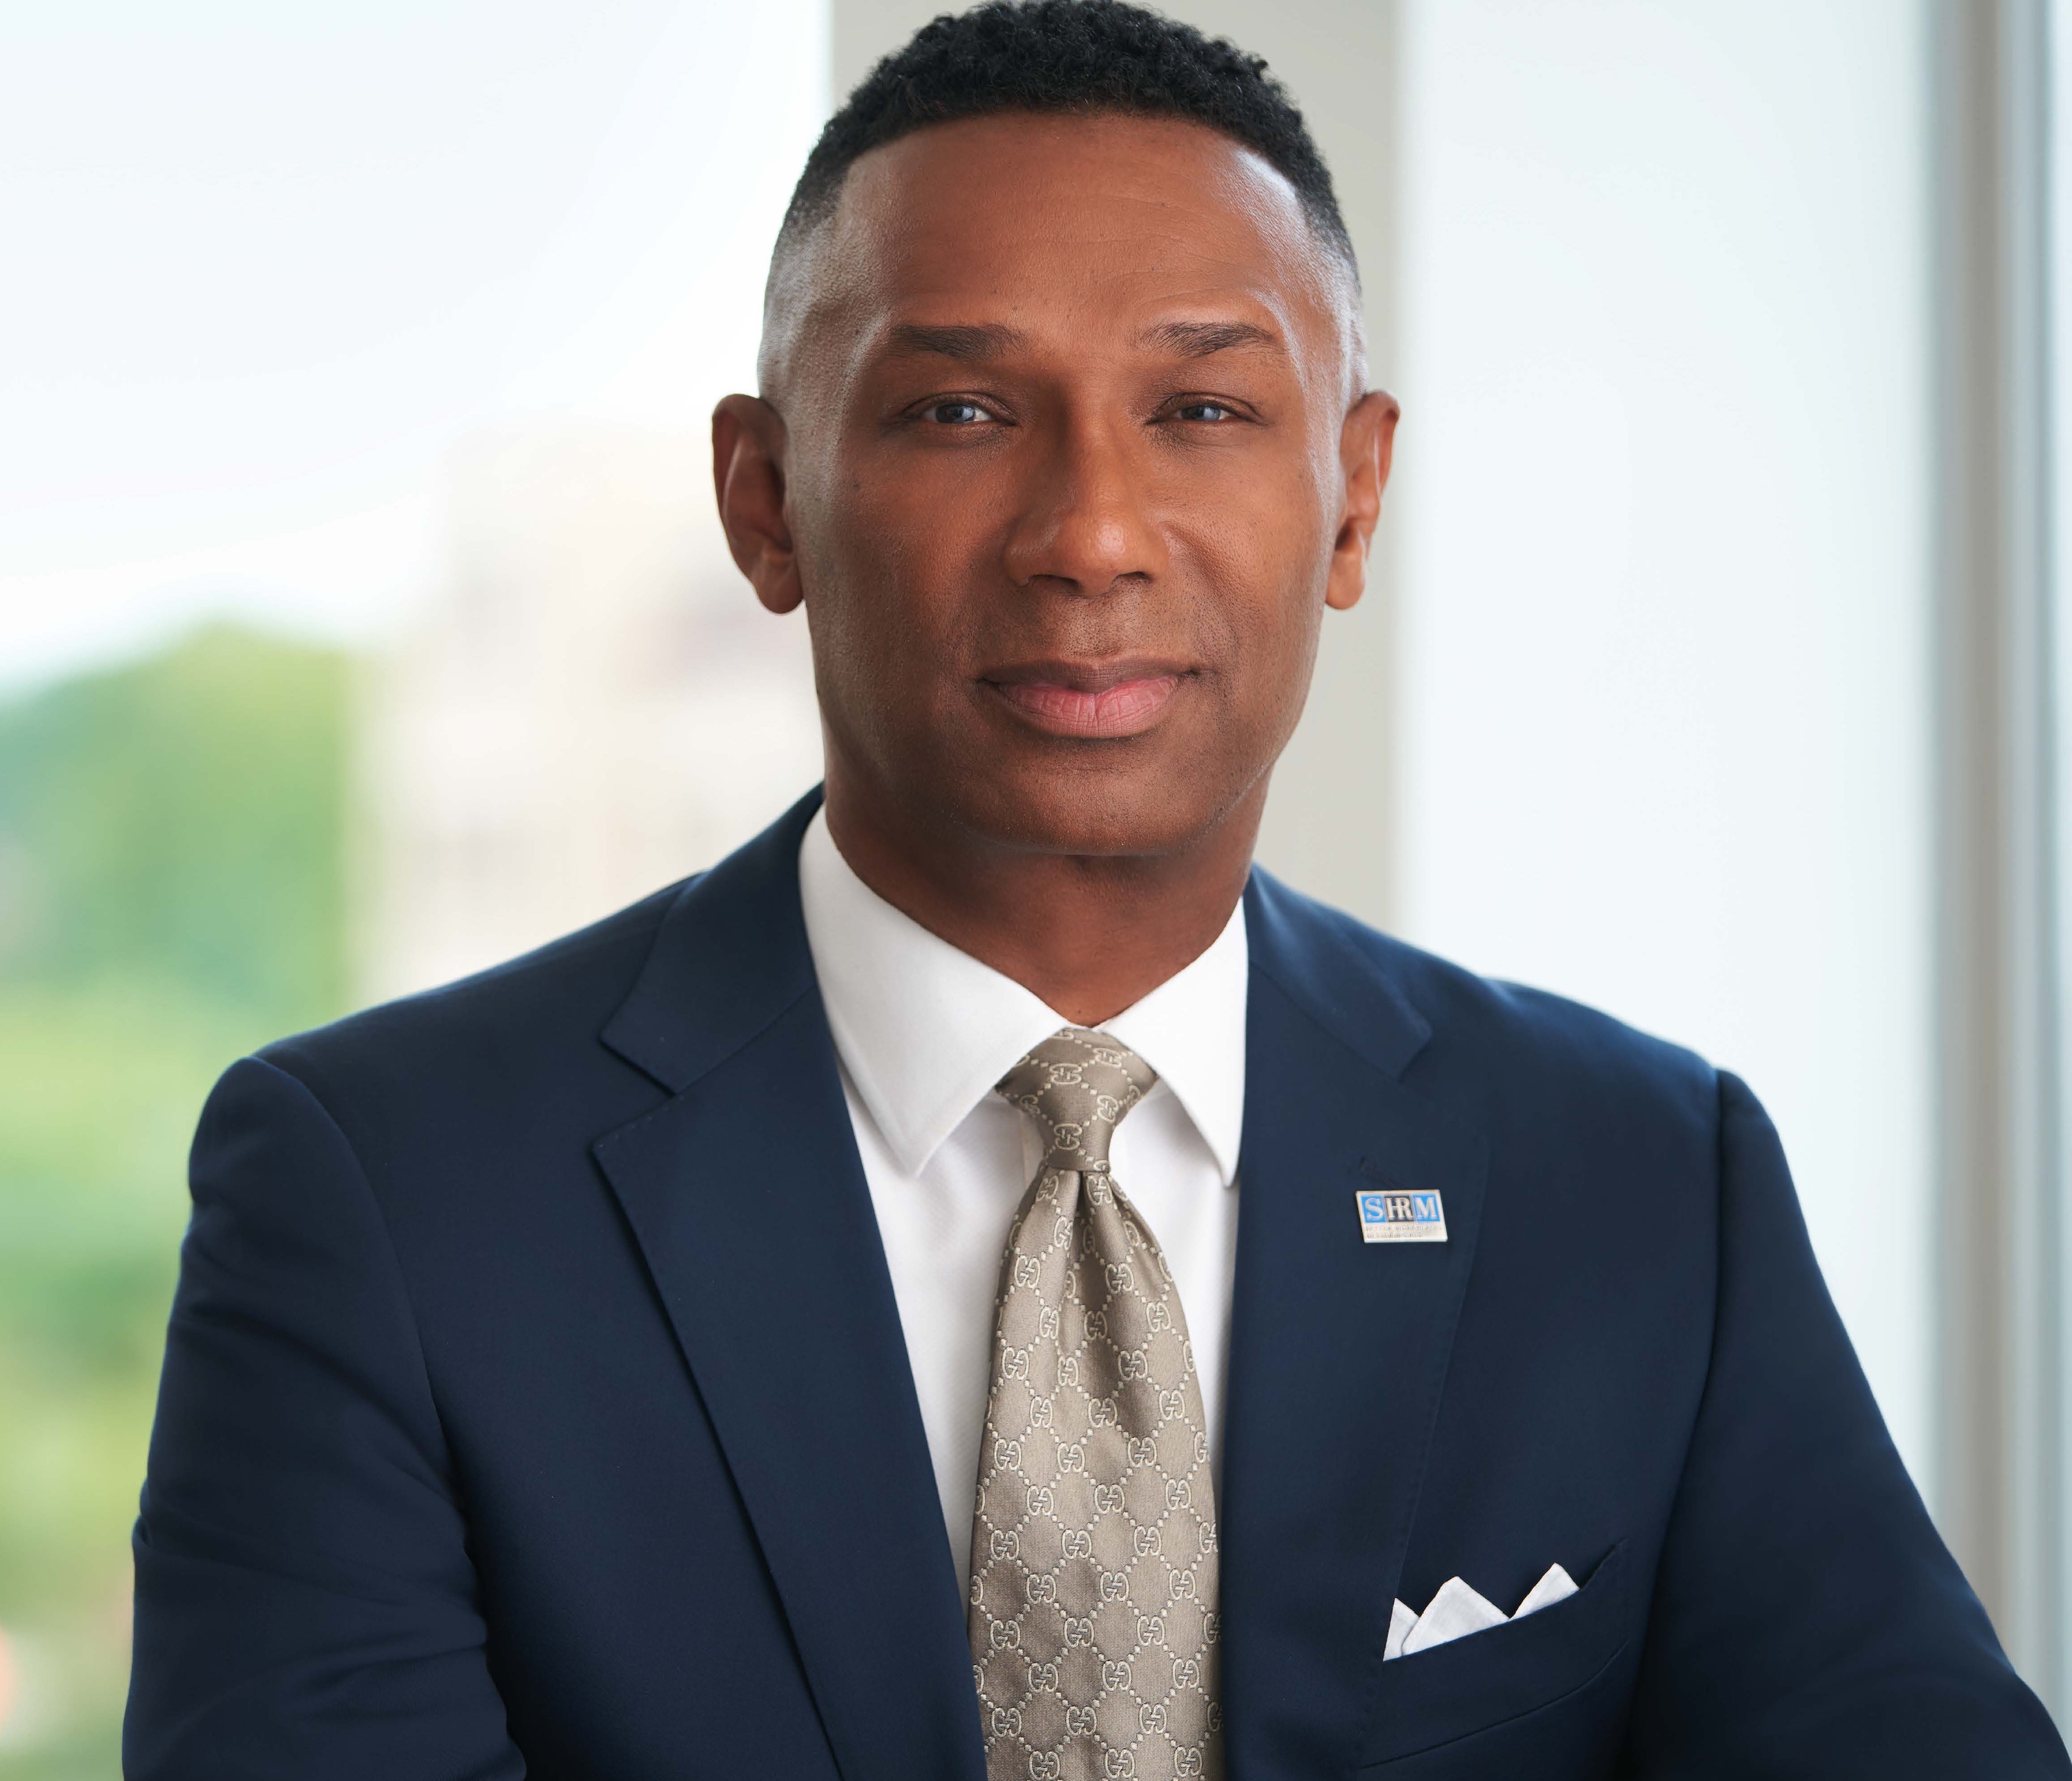 Johnny C. Taylor, Jr., president and CEO of the Society for Human Resource Management